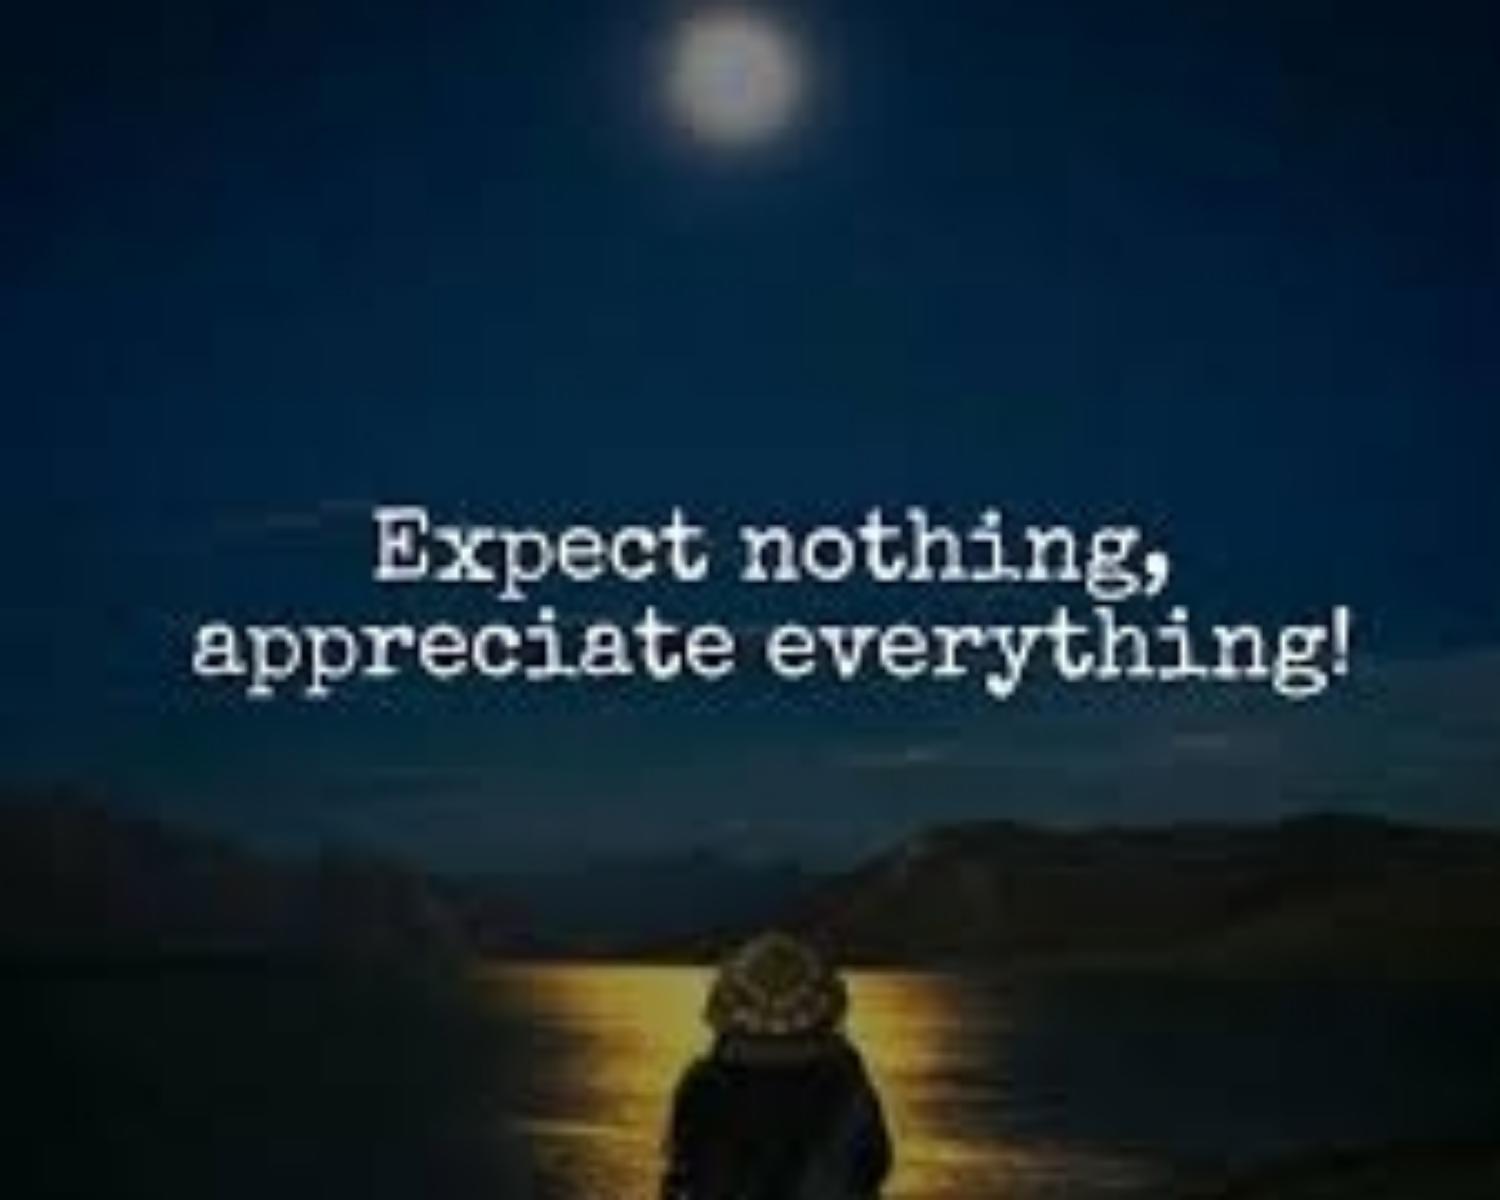 5. Expect nothing and appreciate everything.